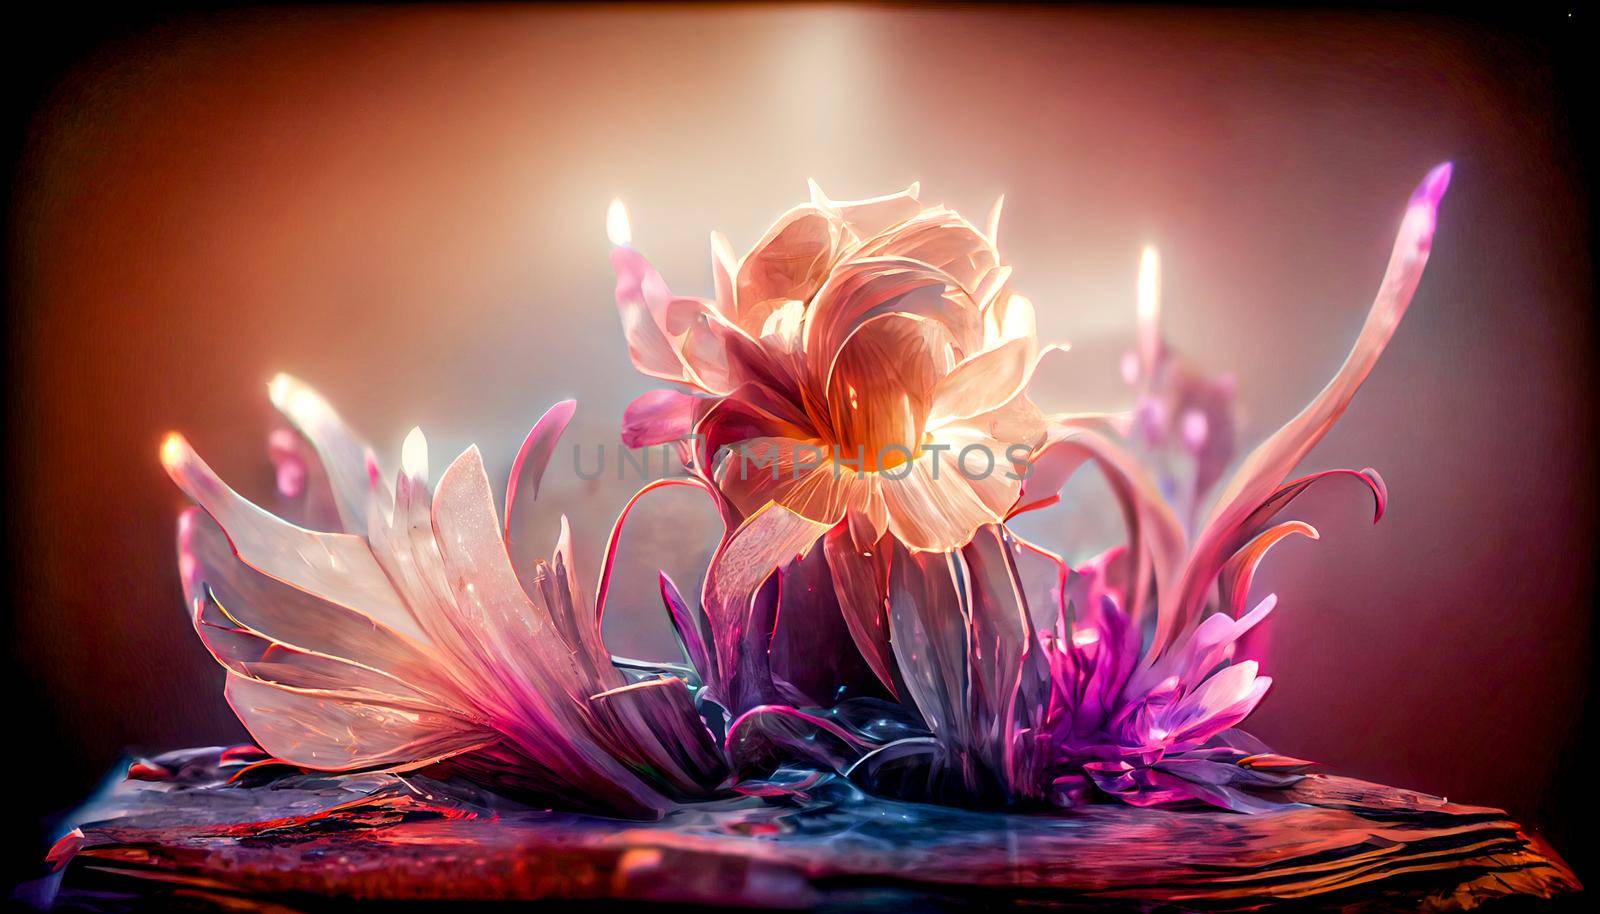 Gorgeous fantasy flower, Beauty and fresh spring collection. 3D Digital art background.